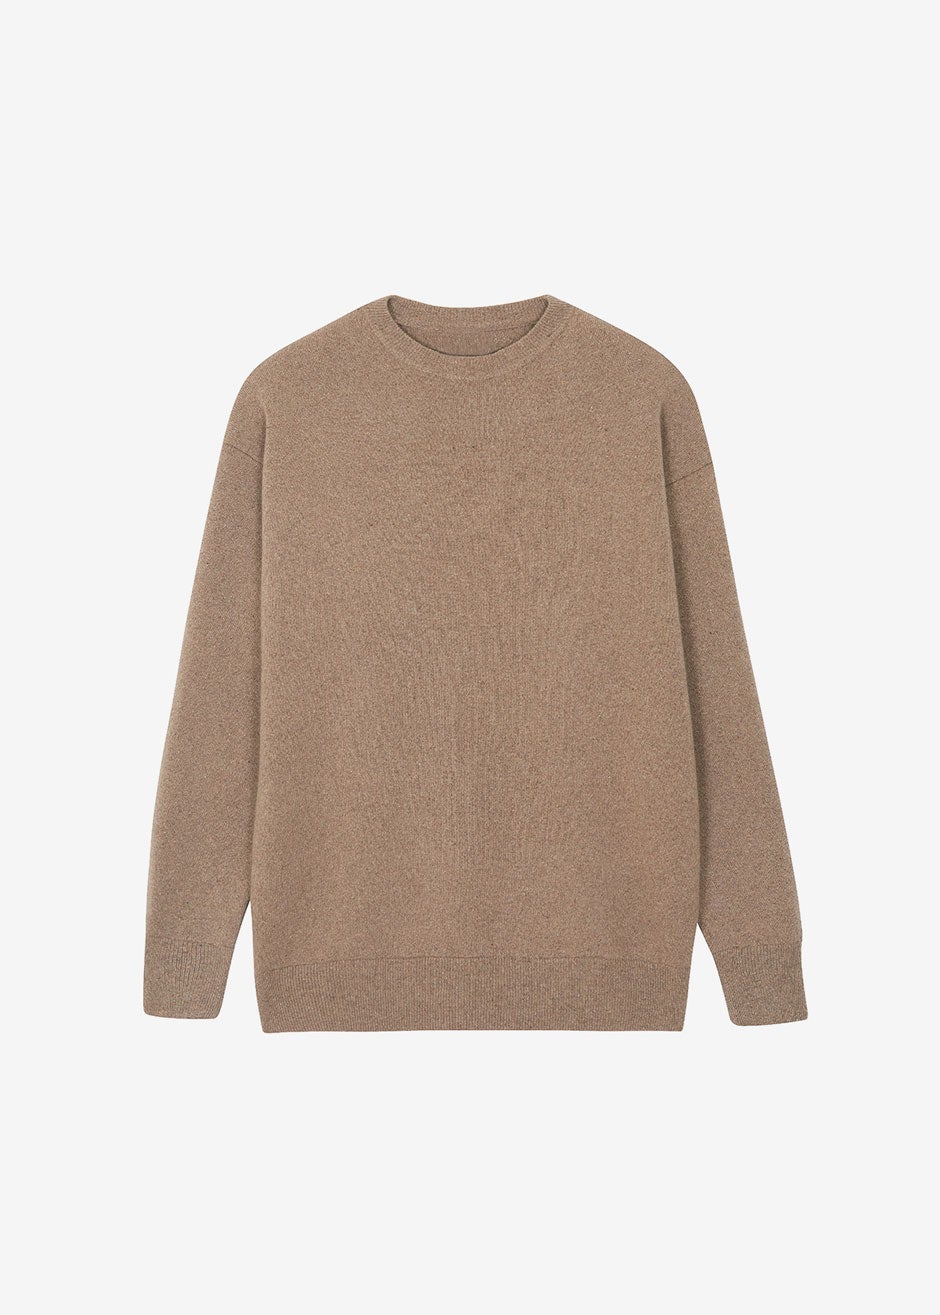 Hadrien Italian Recycled Cashmere Sweater - Taupe - 13